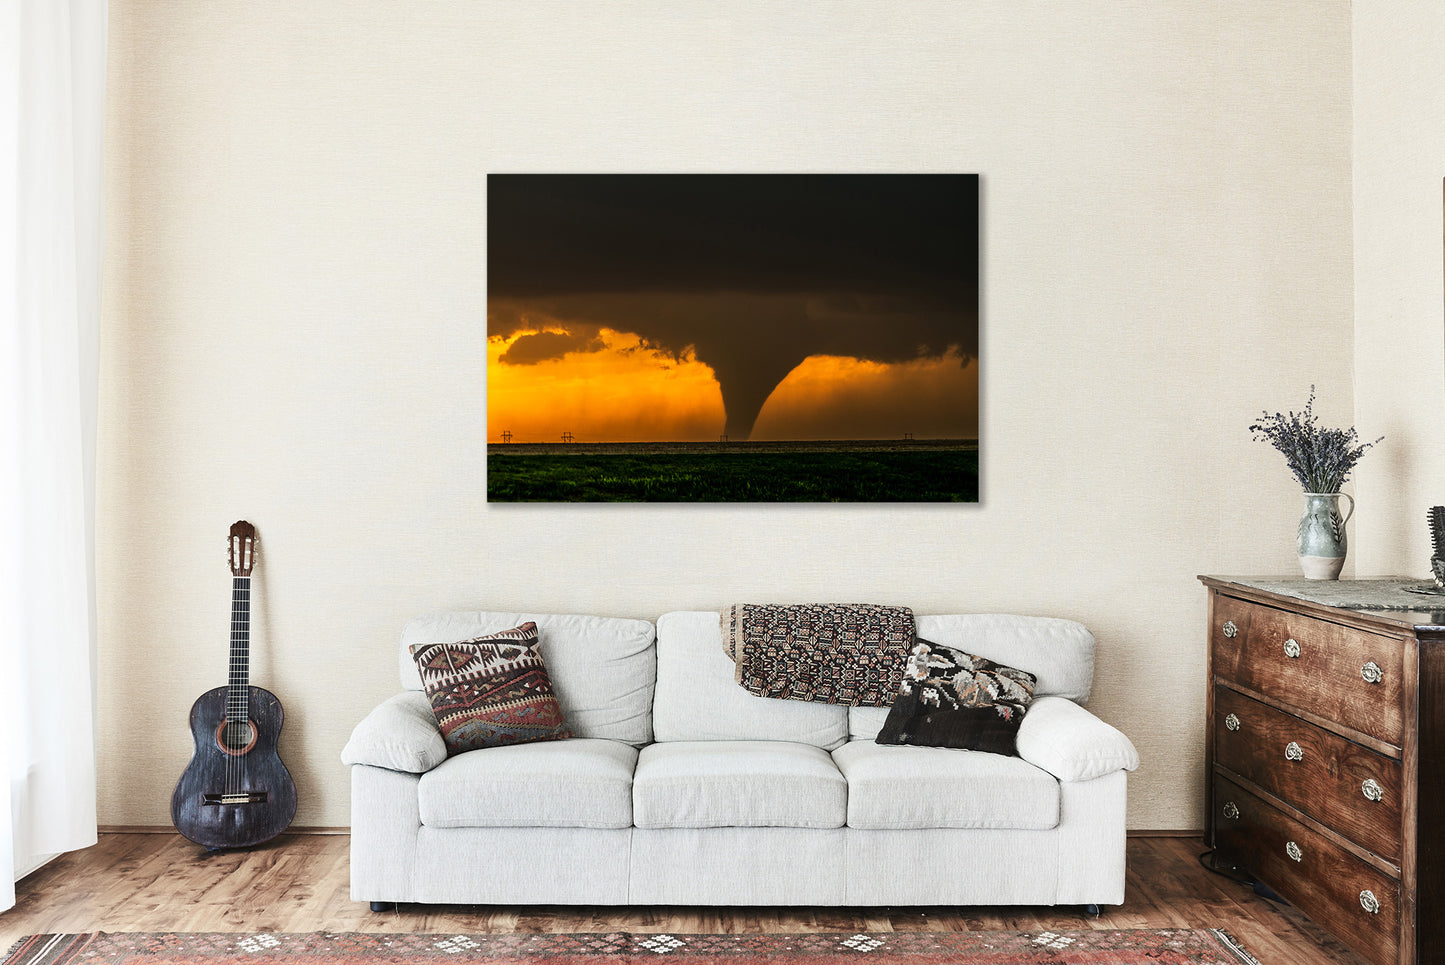 Storm Metal Print (Ready to Hang) Photo on Aluminum of Large Tornado Appearing as Silhouette Against Evening Sky at Sunset in Kansas Thunderstorm Wall Art Weather Decor